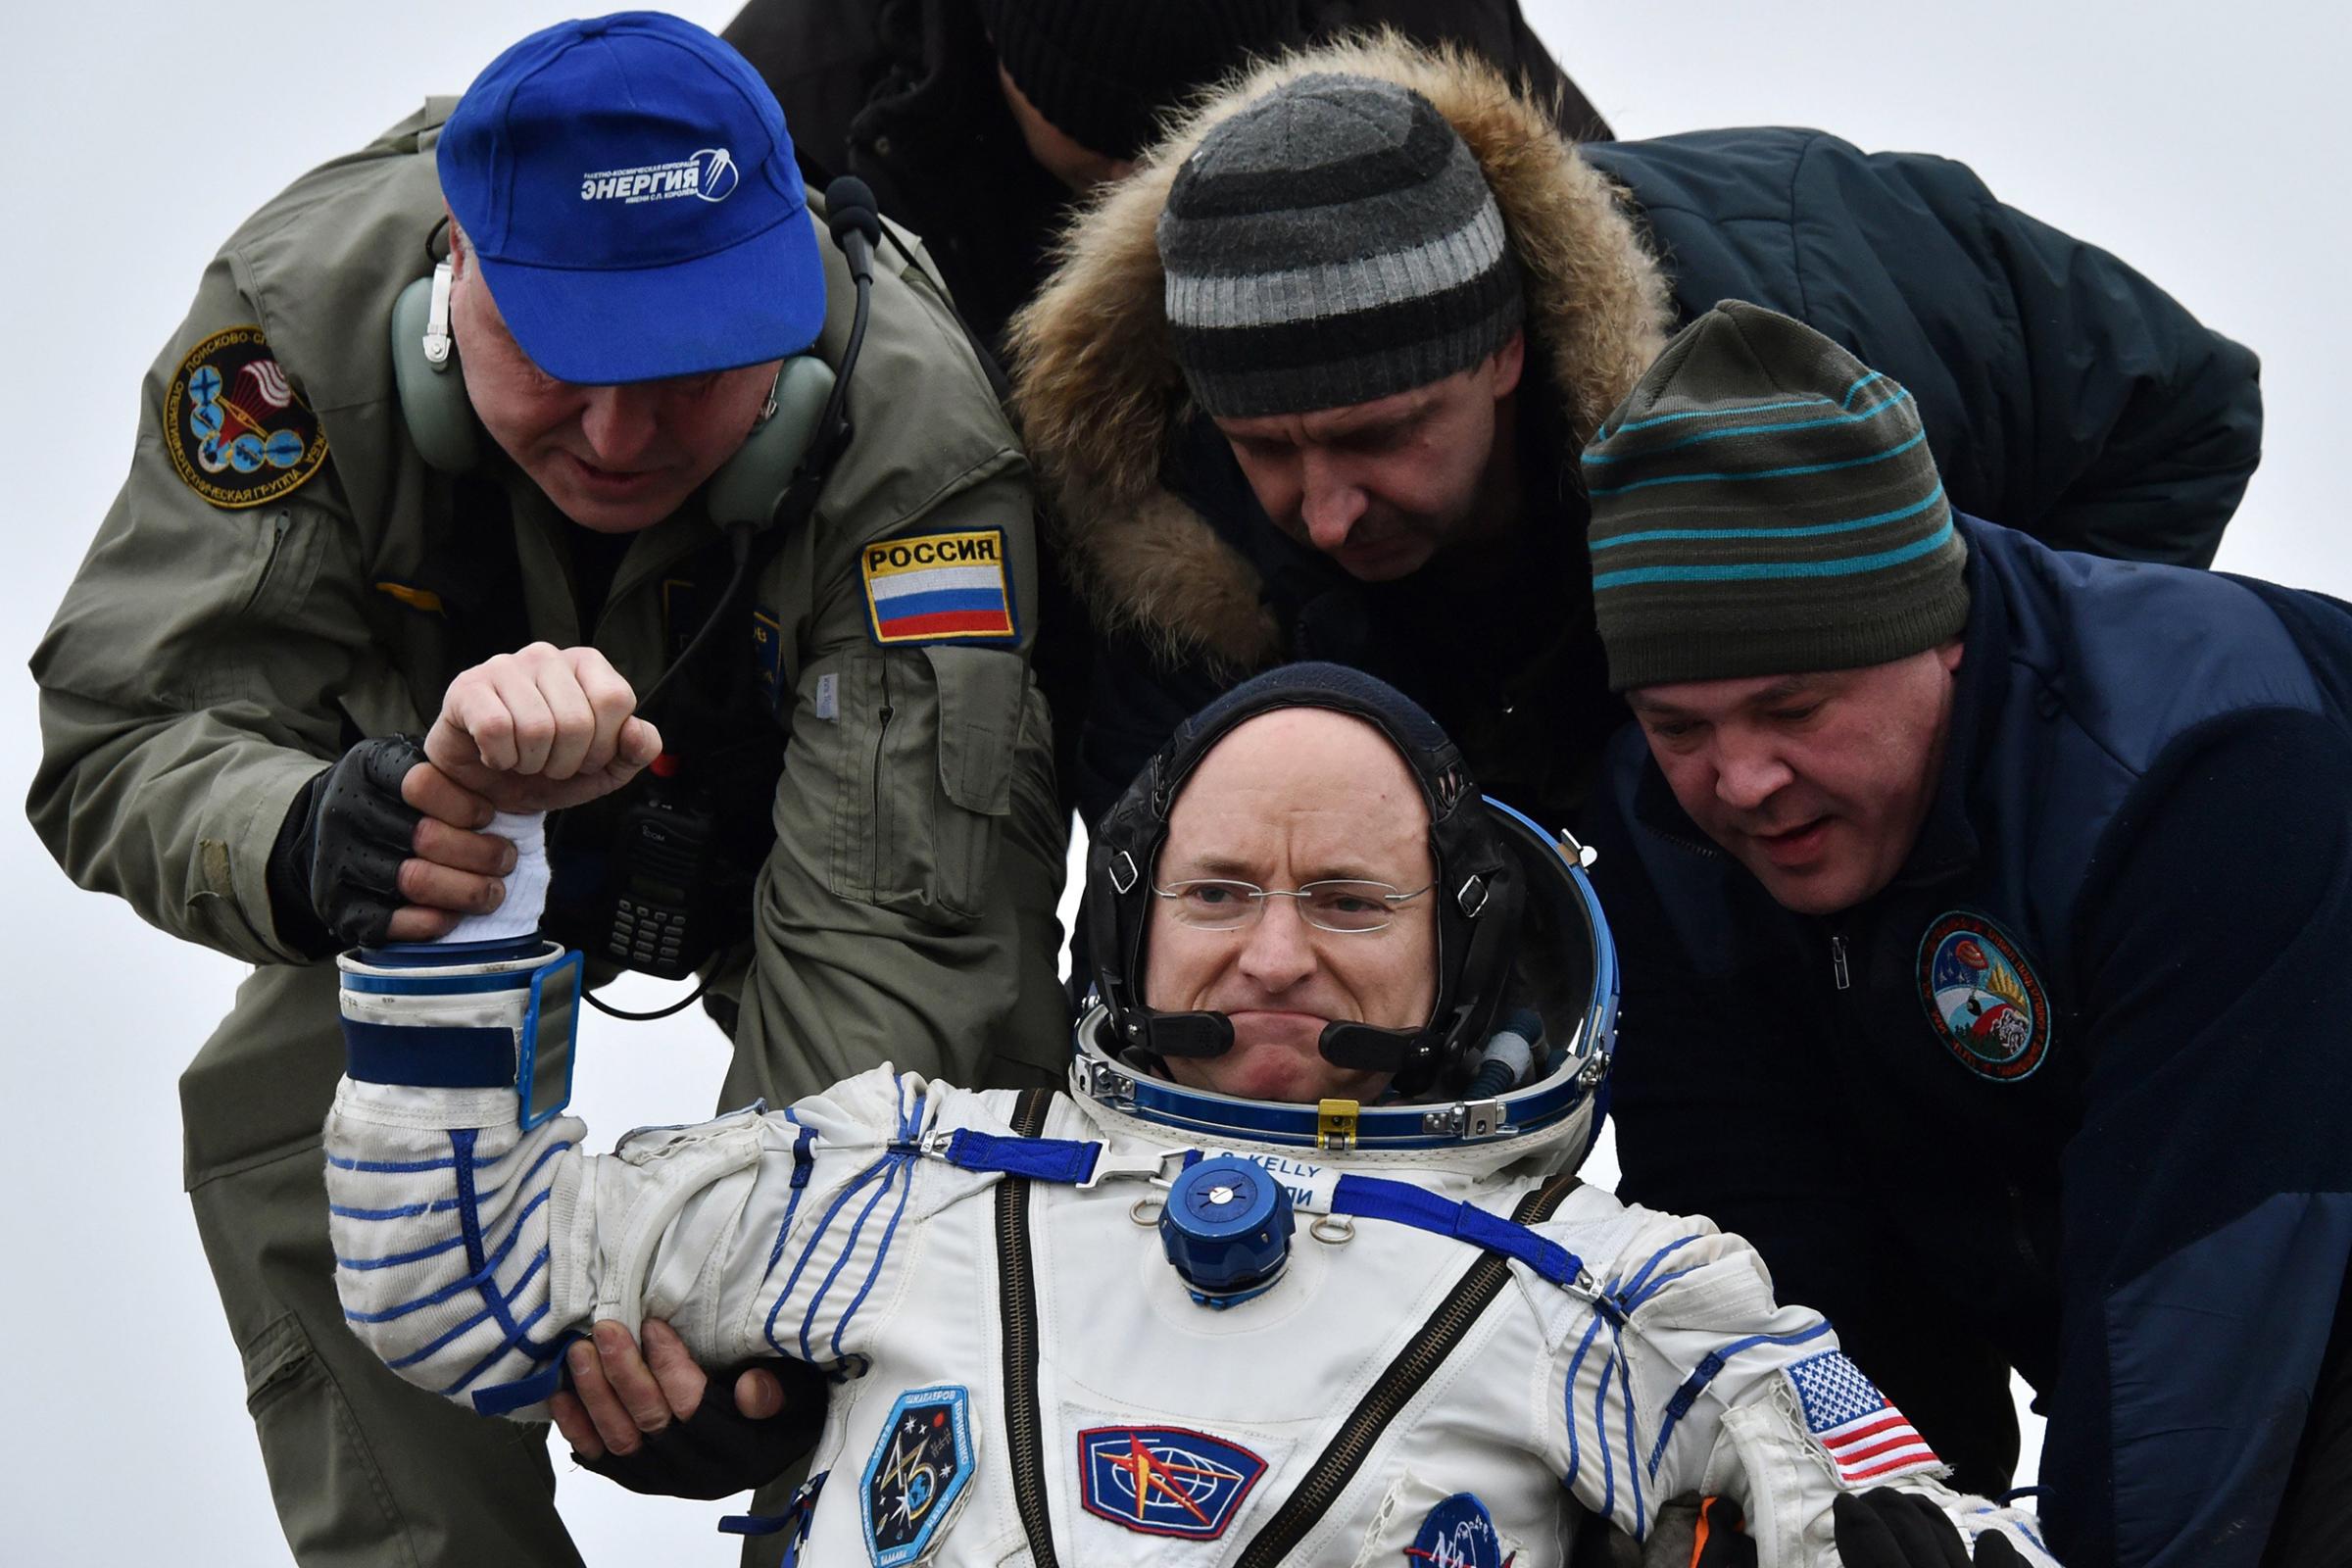 Ground personnel help Scott Kelly get off the Soyuz TMA-18M space capsule after landing in Kazakhstan on March 2, 2016.